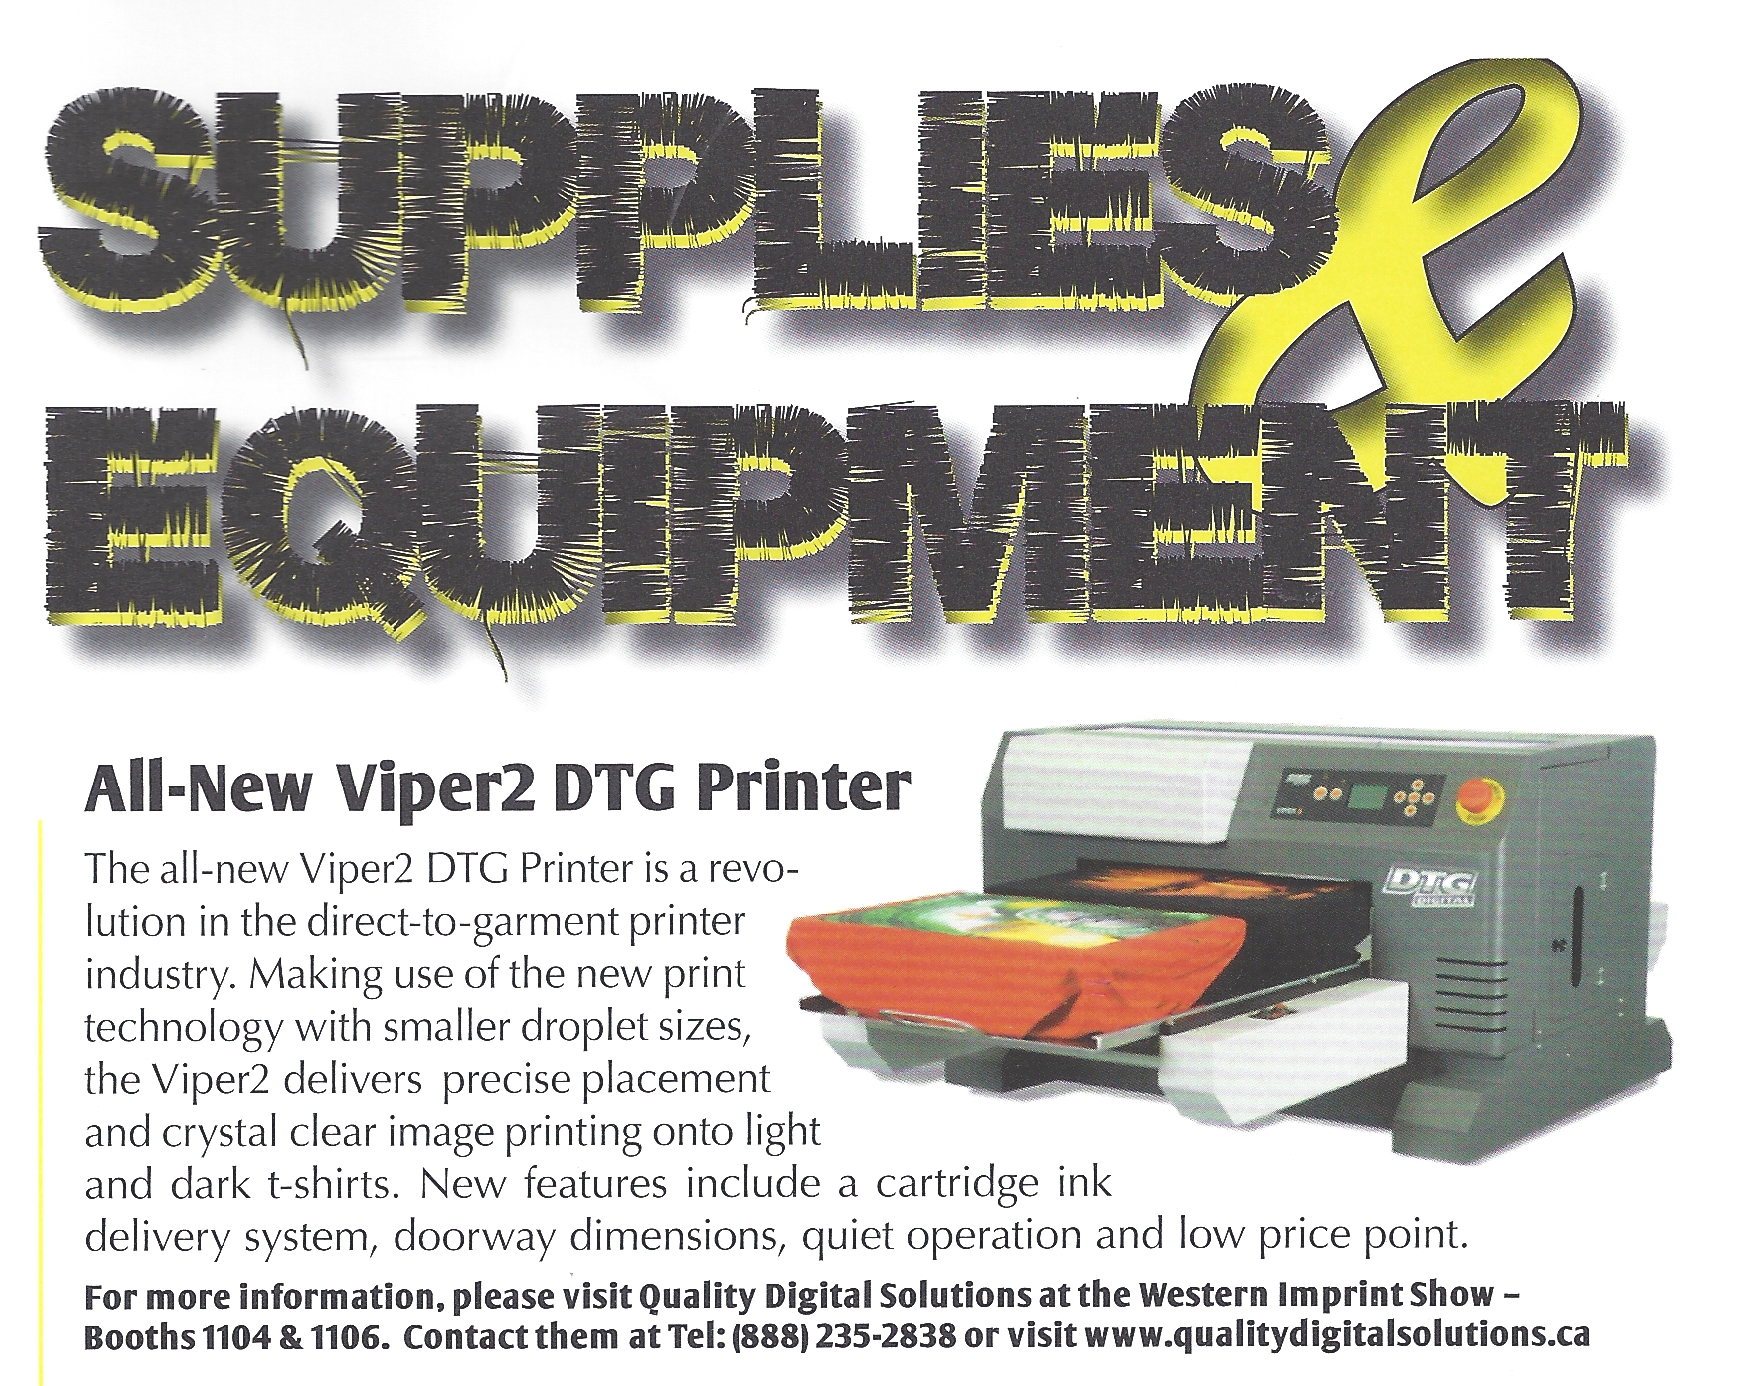 Quality Digital Solutions - Imprint Canada Article on the Viper2